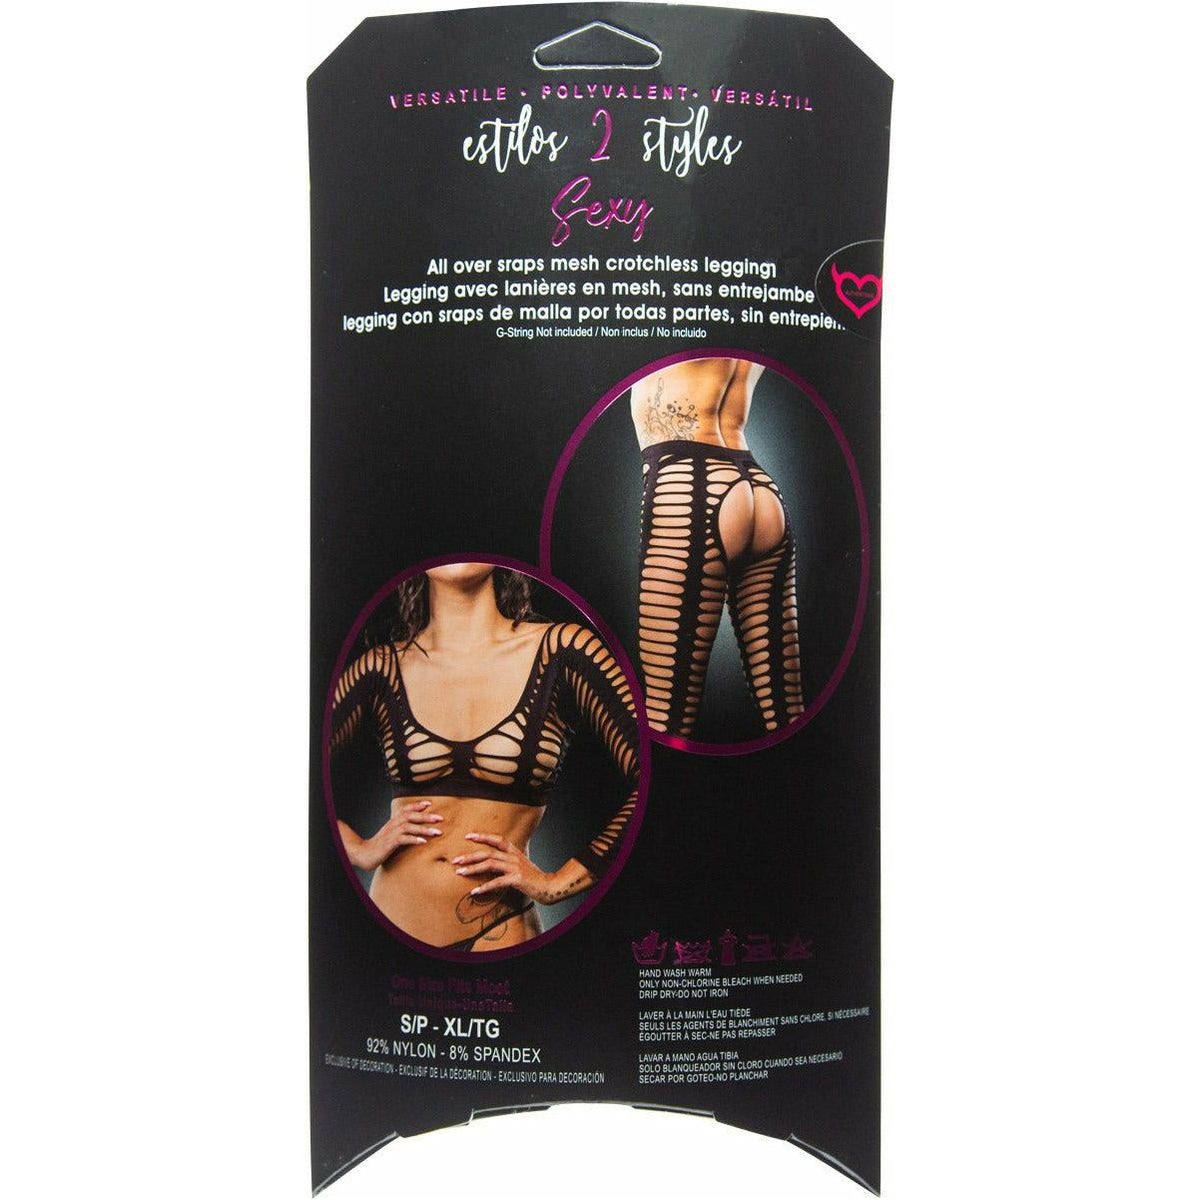 Beverly Hills Naughty Girl - All Over Straps Mesh Crotchless Leggings - Black - One Size